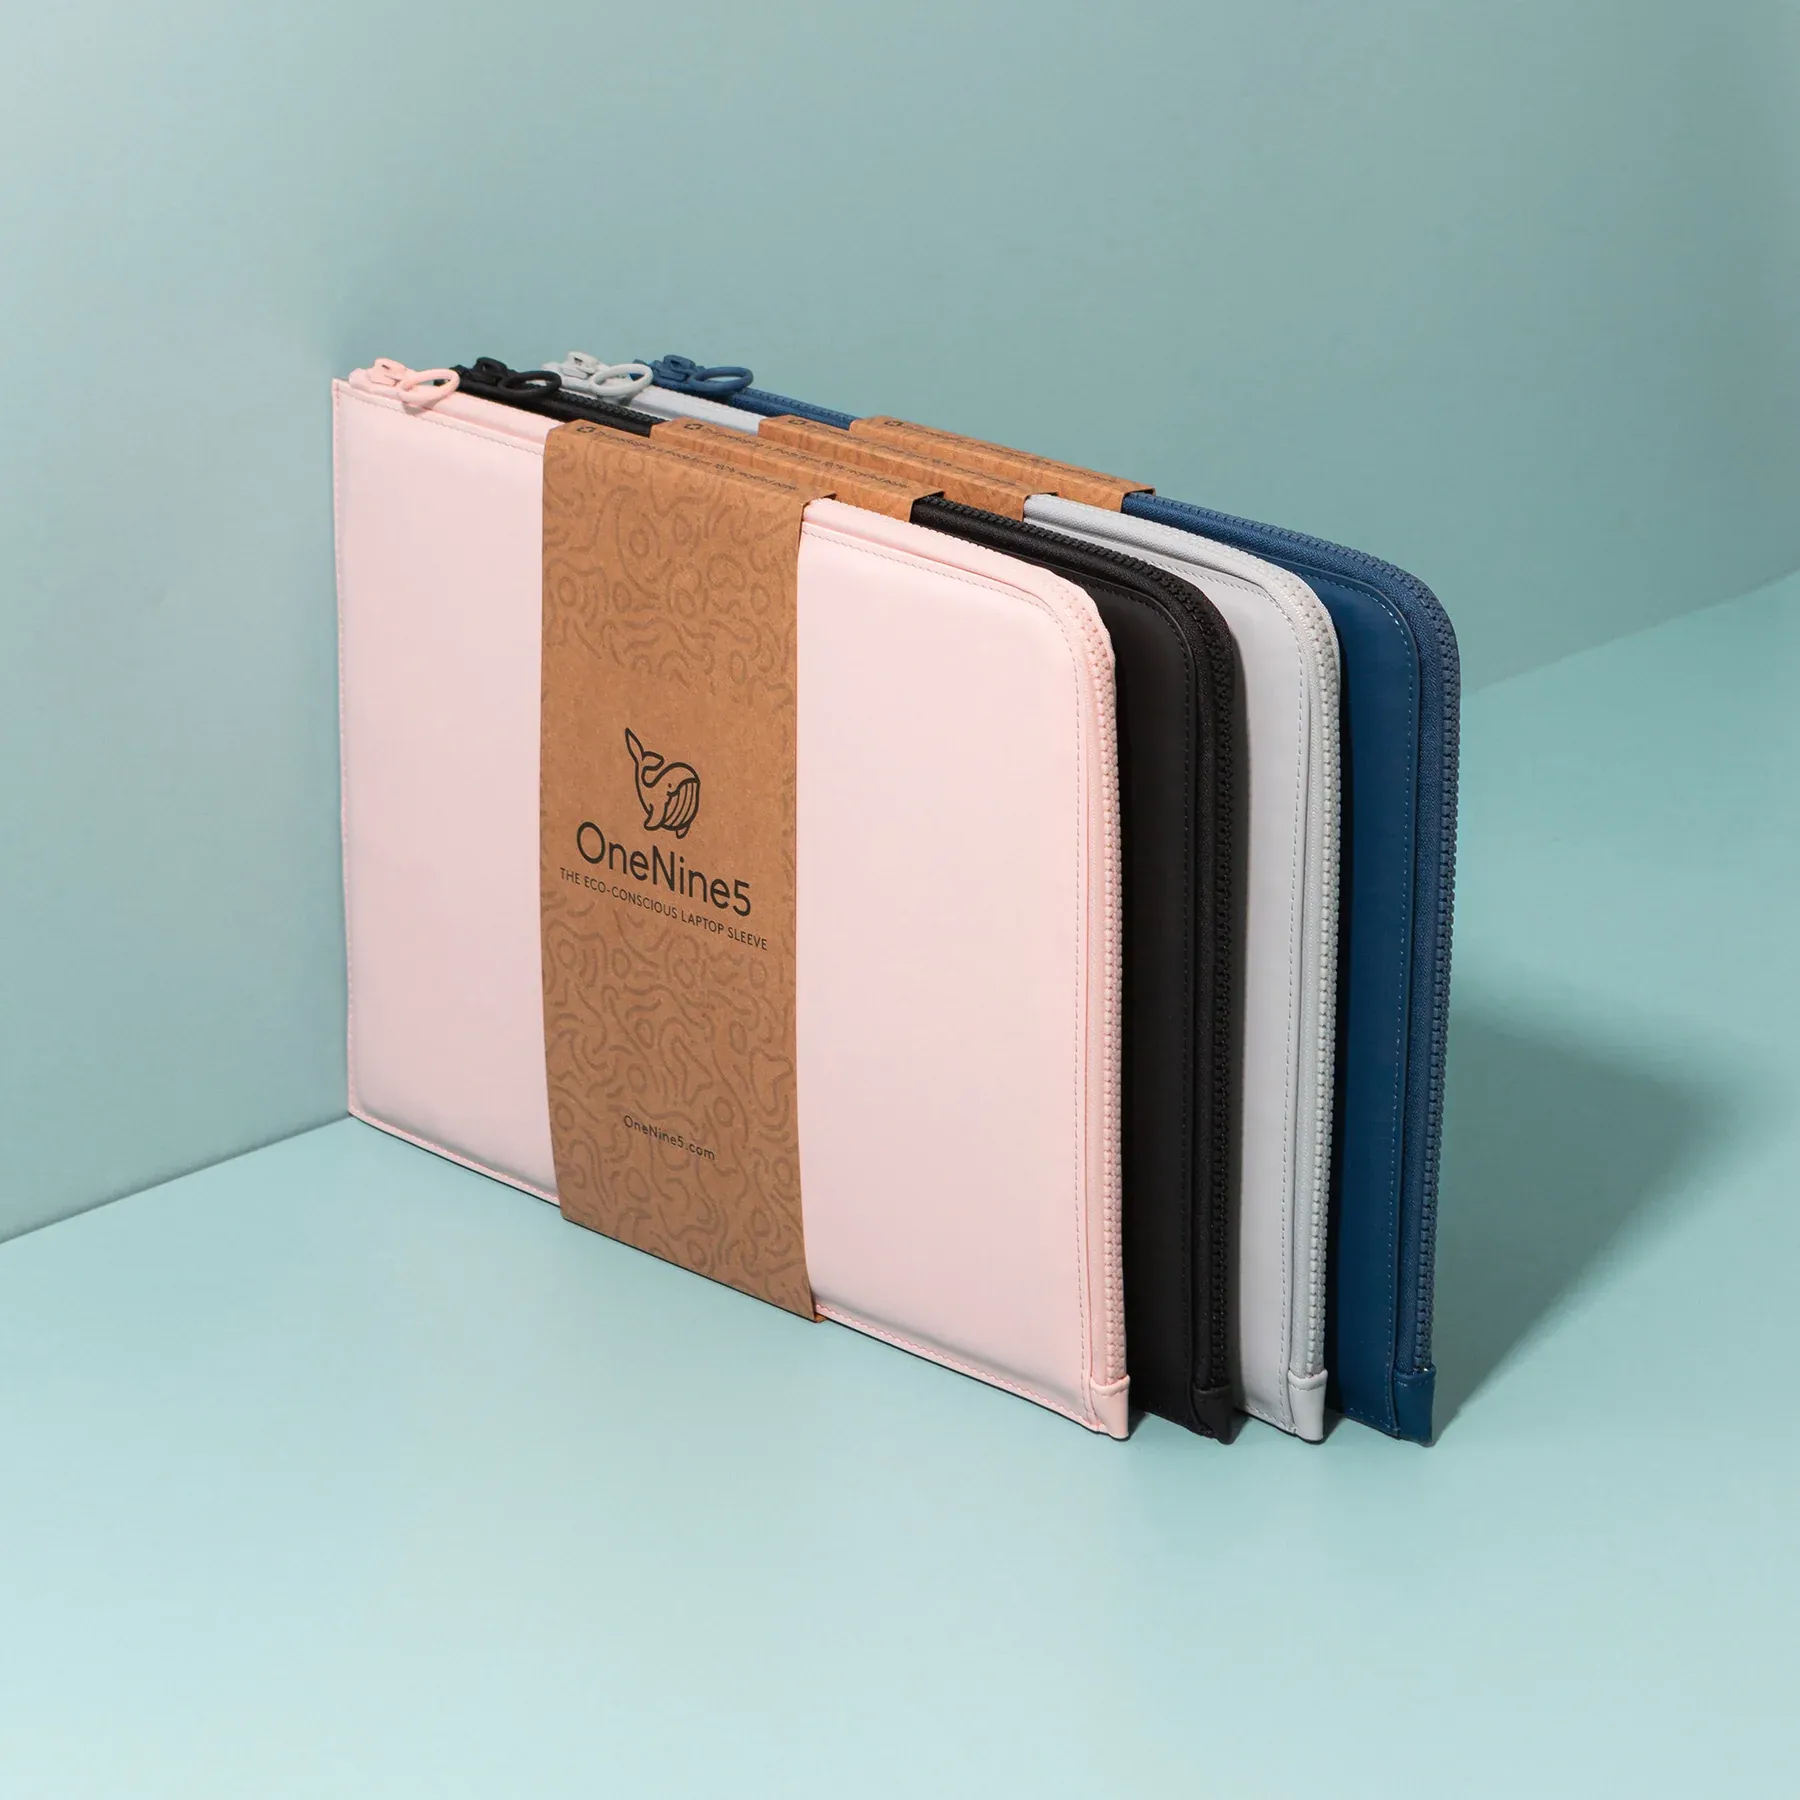 This Laptop Sleeve Will Keep Your Laptop Safe and Paperwork Organised